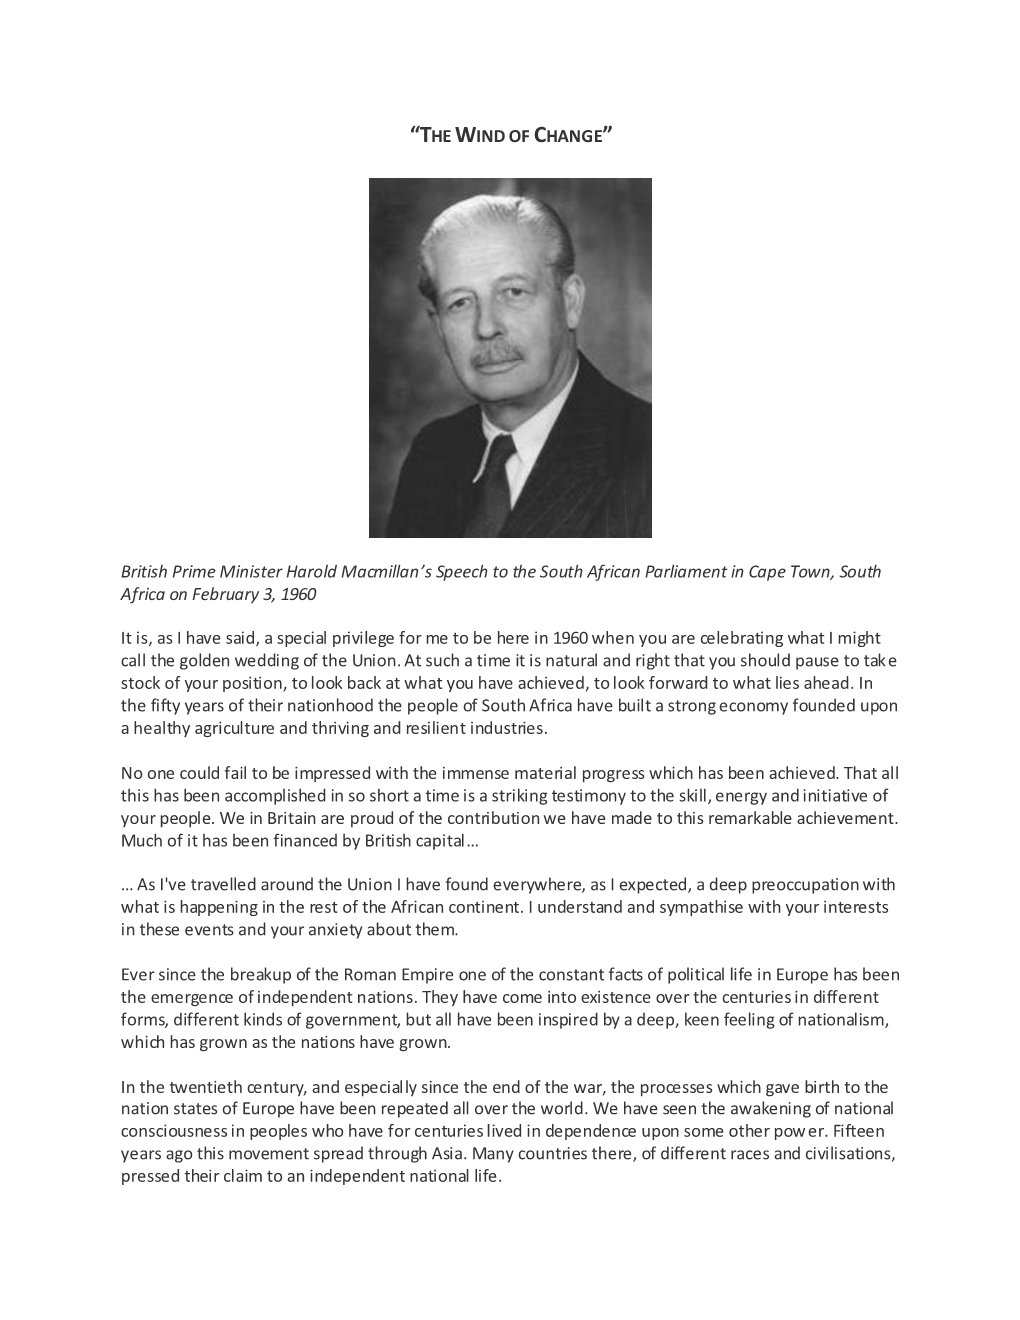 British Prime Minister Harold Macmillan's Speech to the South